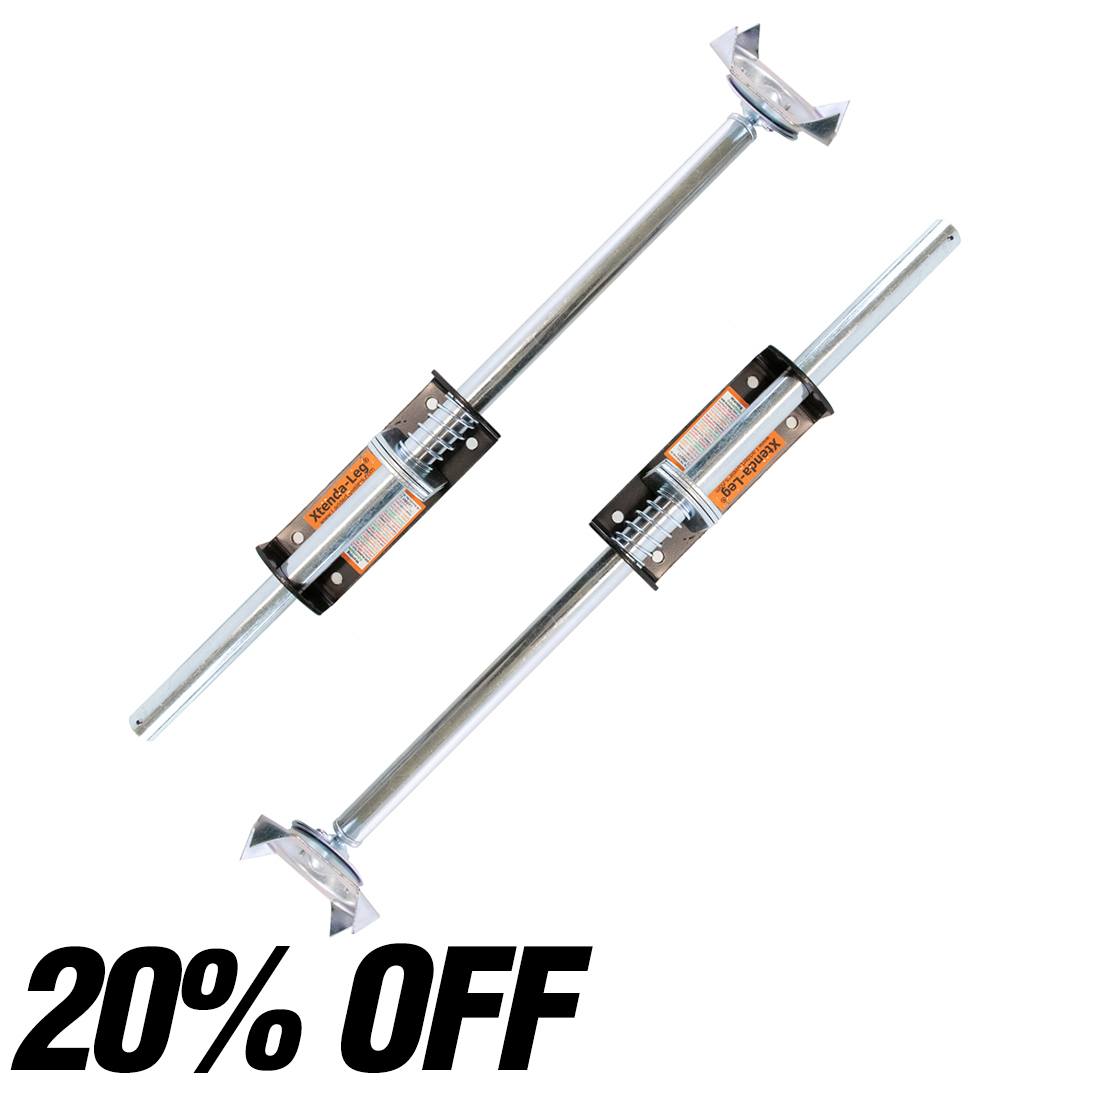 Xtenda-Leg Ladder Levelers - Cleated Feet - Pair Tilted Left View 20% Off Label